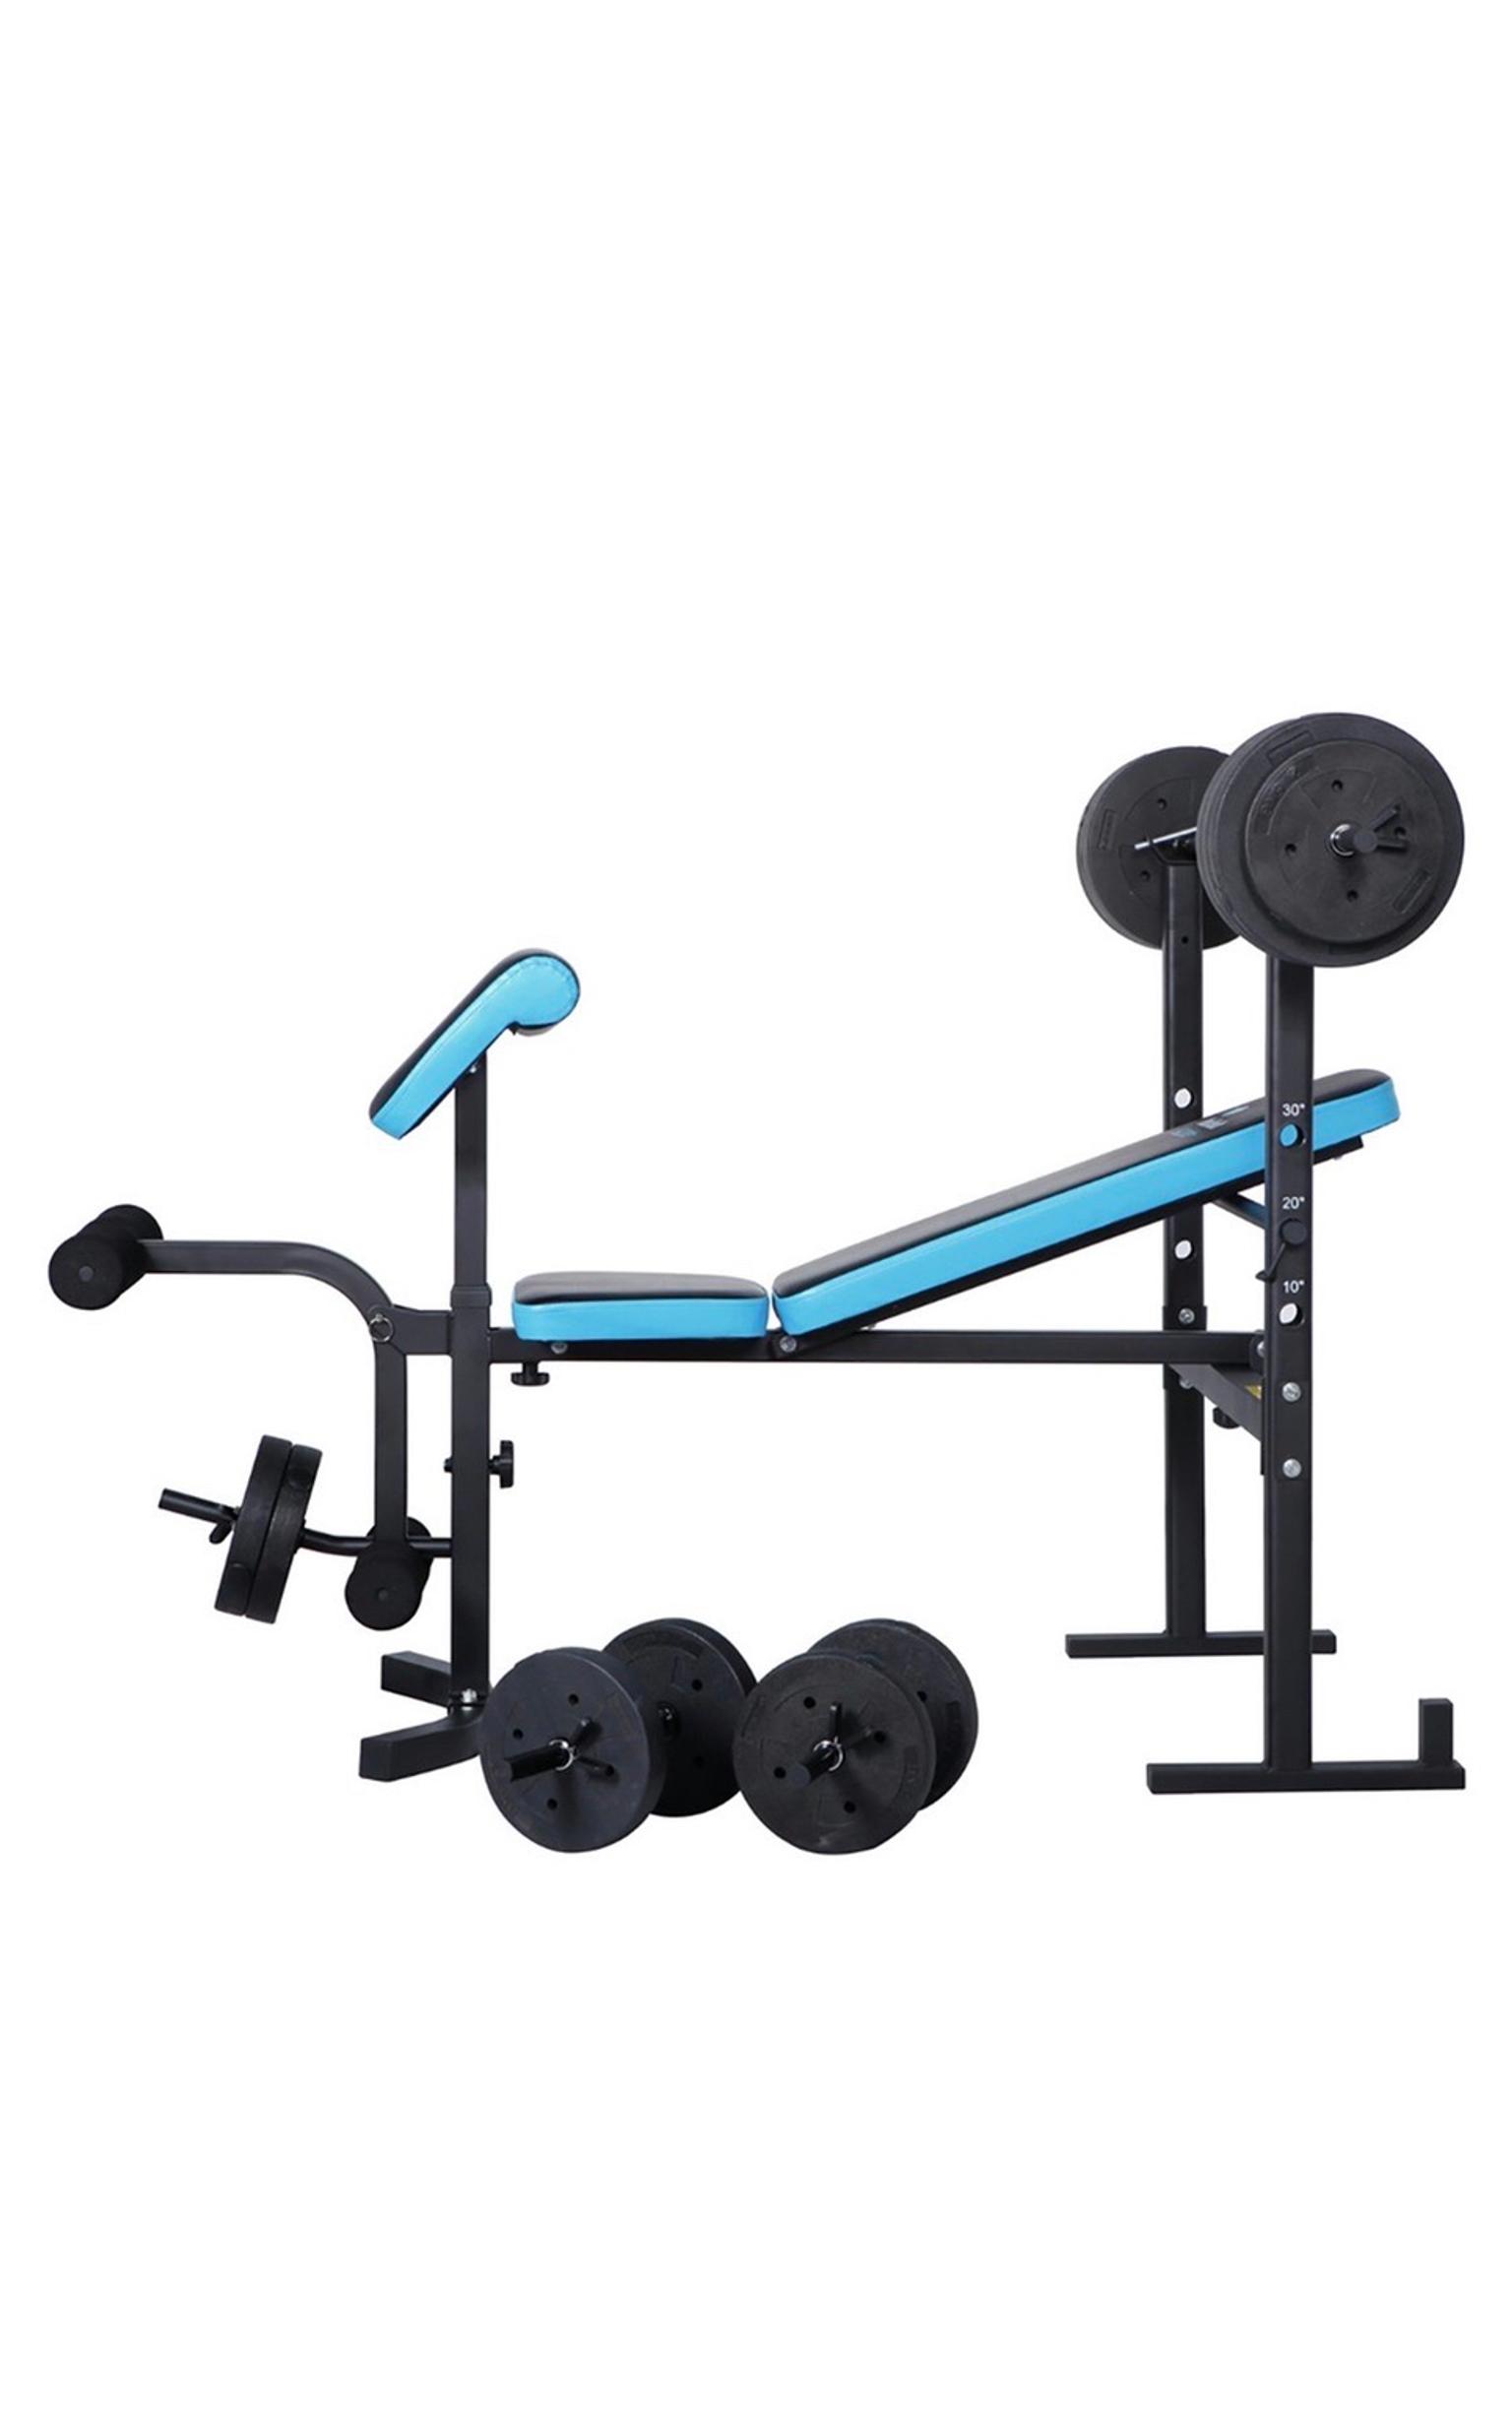 and 8 x 2.5kg vinyl weight plates 2 x 45cm dumbbell bars Pro Fitness Folding 50kg Weight Lifting Workout Bench Press 1 x 5ft bar includes a detachable preacher curl and leg curl station 6 x 5kg 